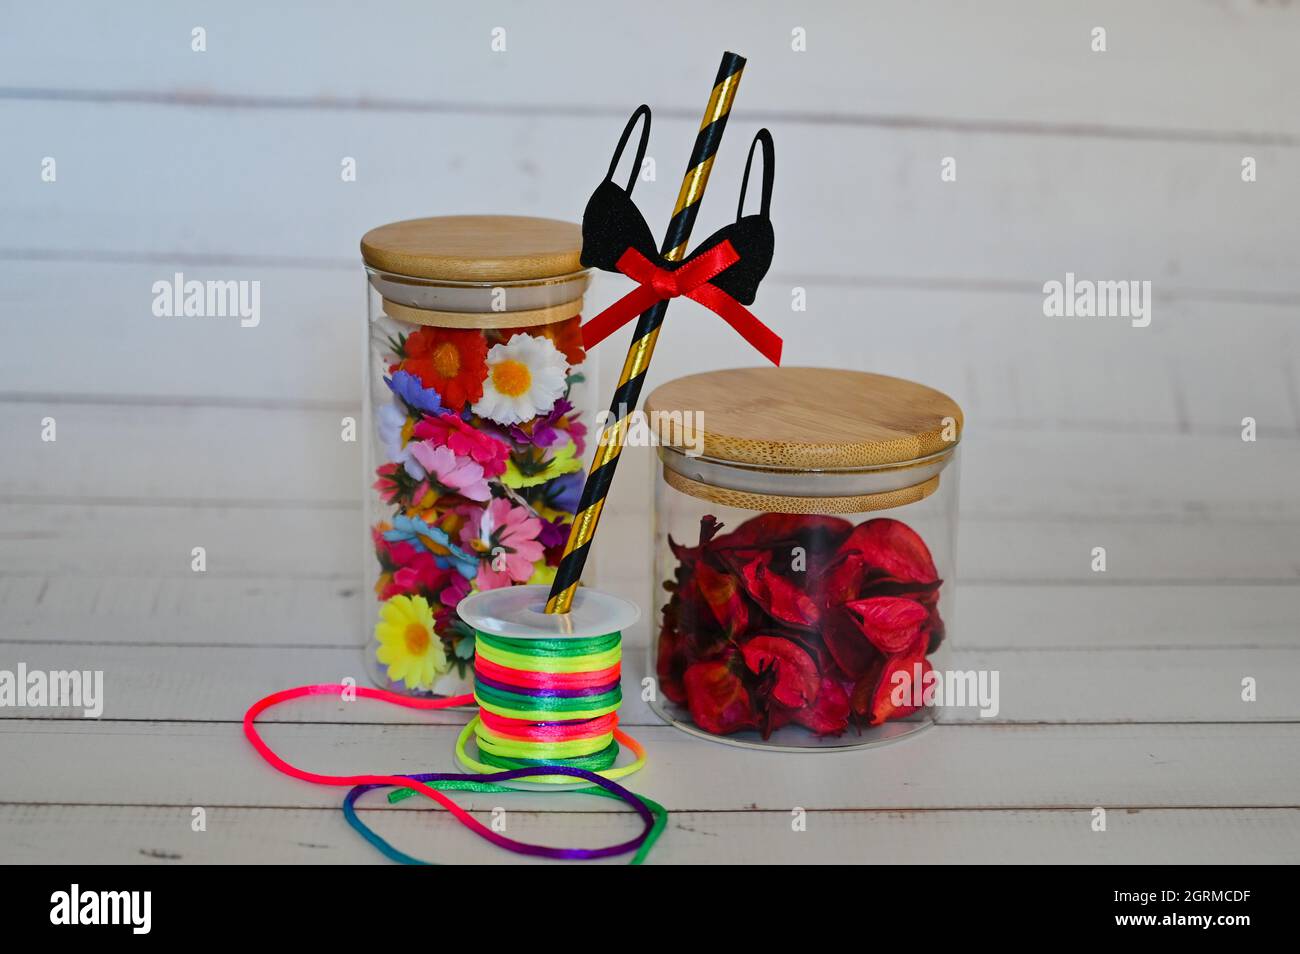 decorative elements for various festive events are placed in glass jars on a light background Stock Photo